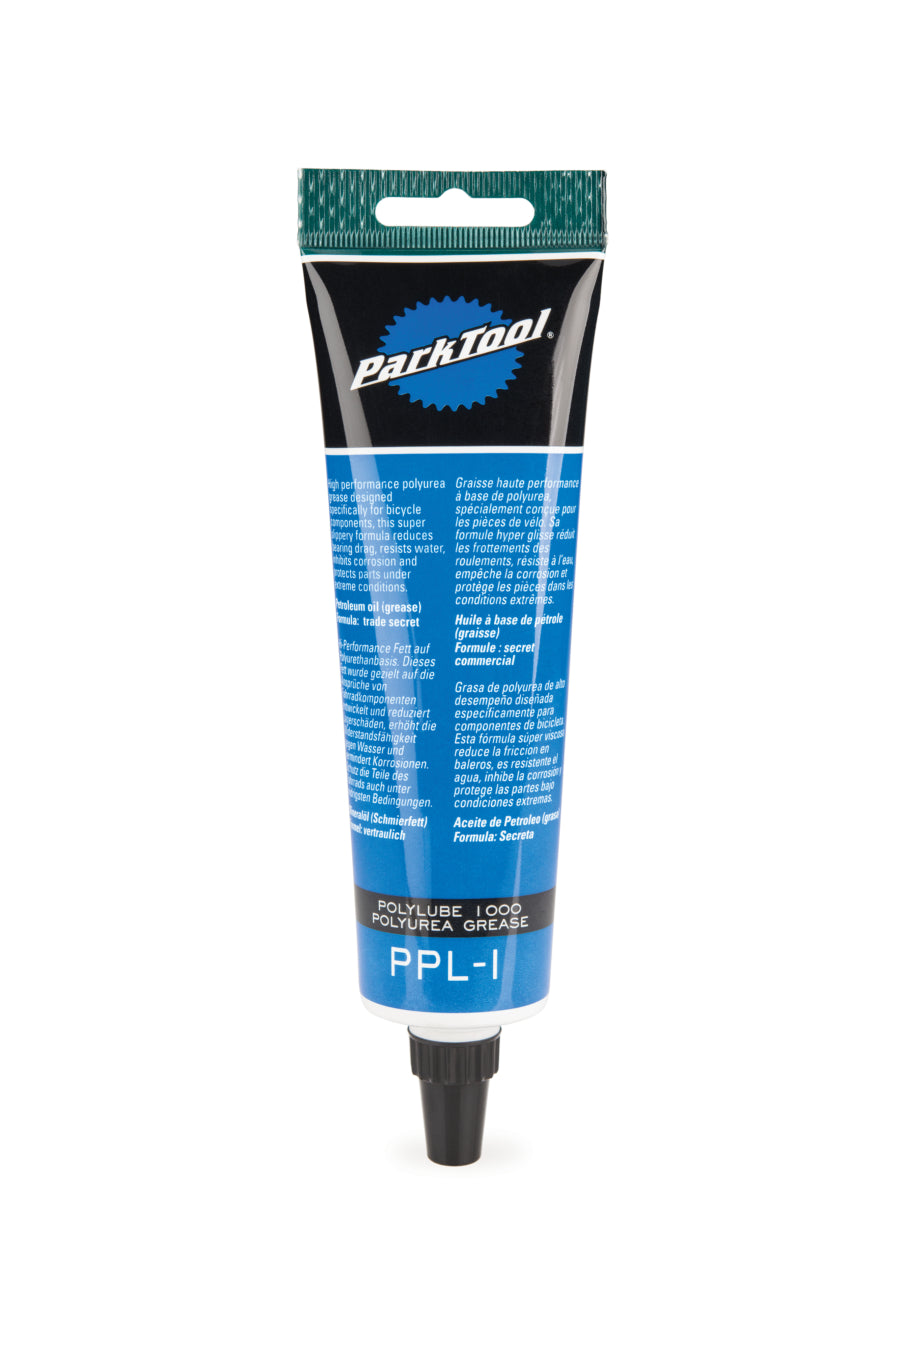 Park Tool Grease Polylube PPL-1 113g